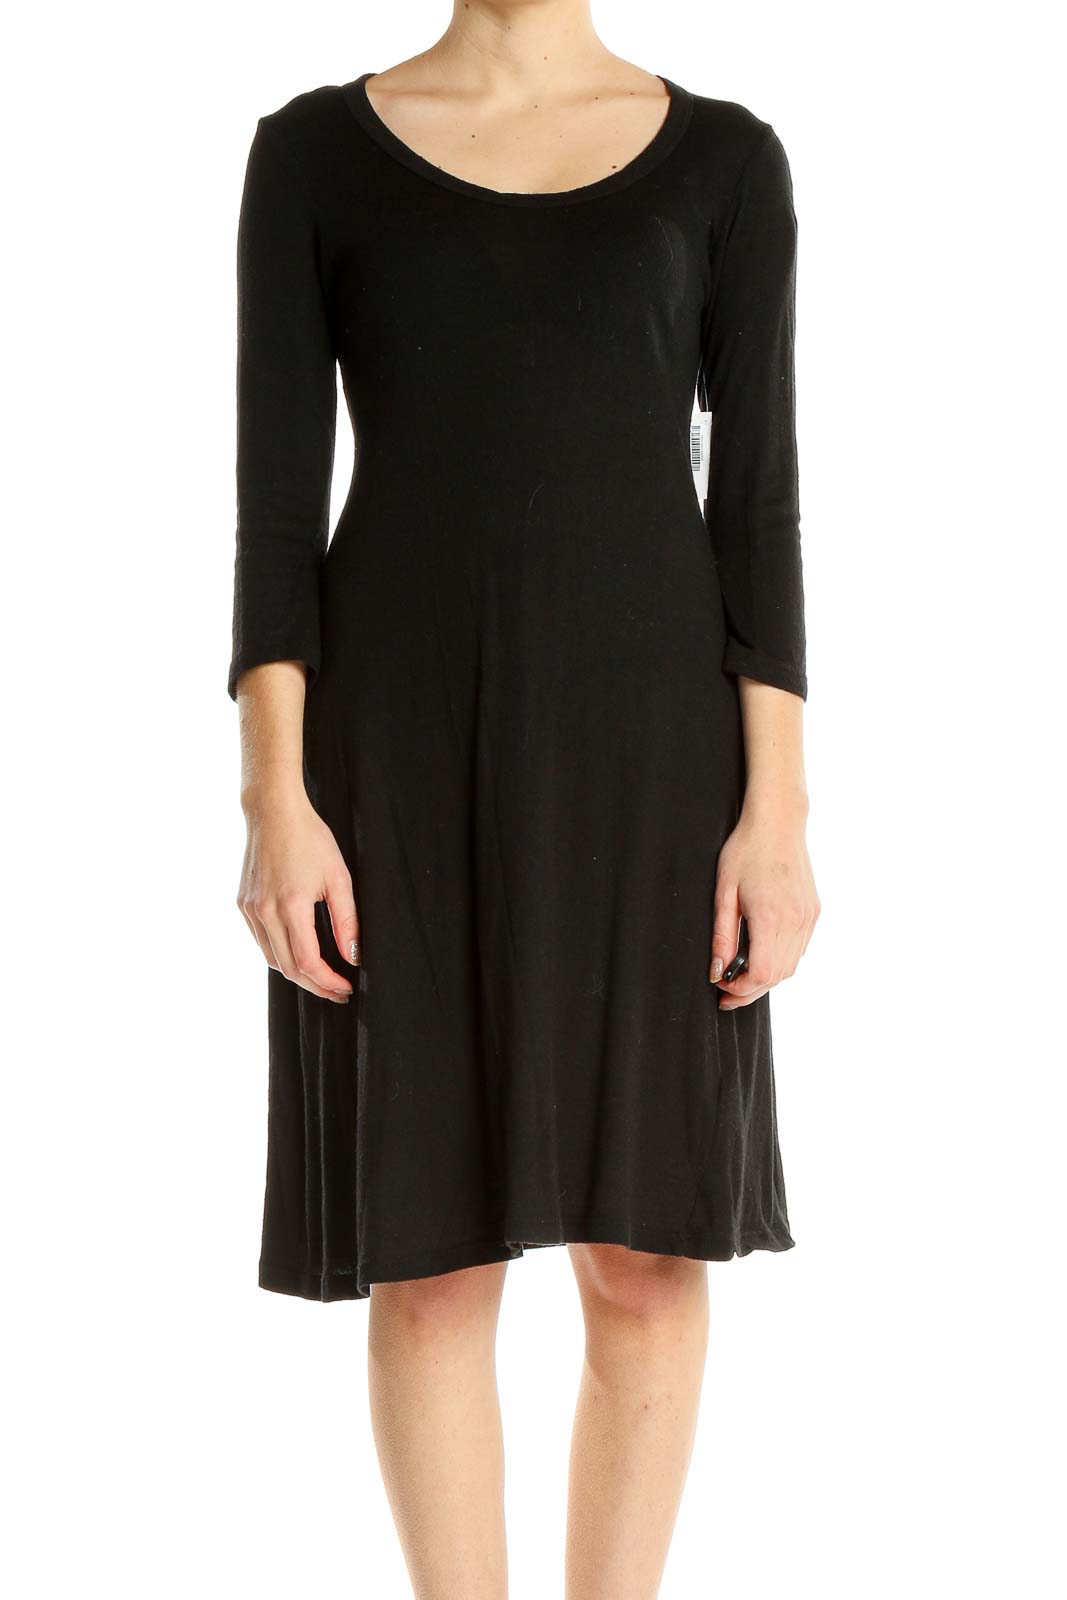 Black Classic Fit & Flare Dress Front